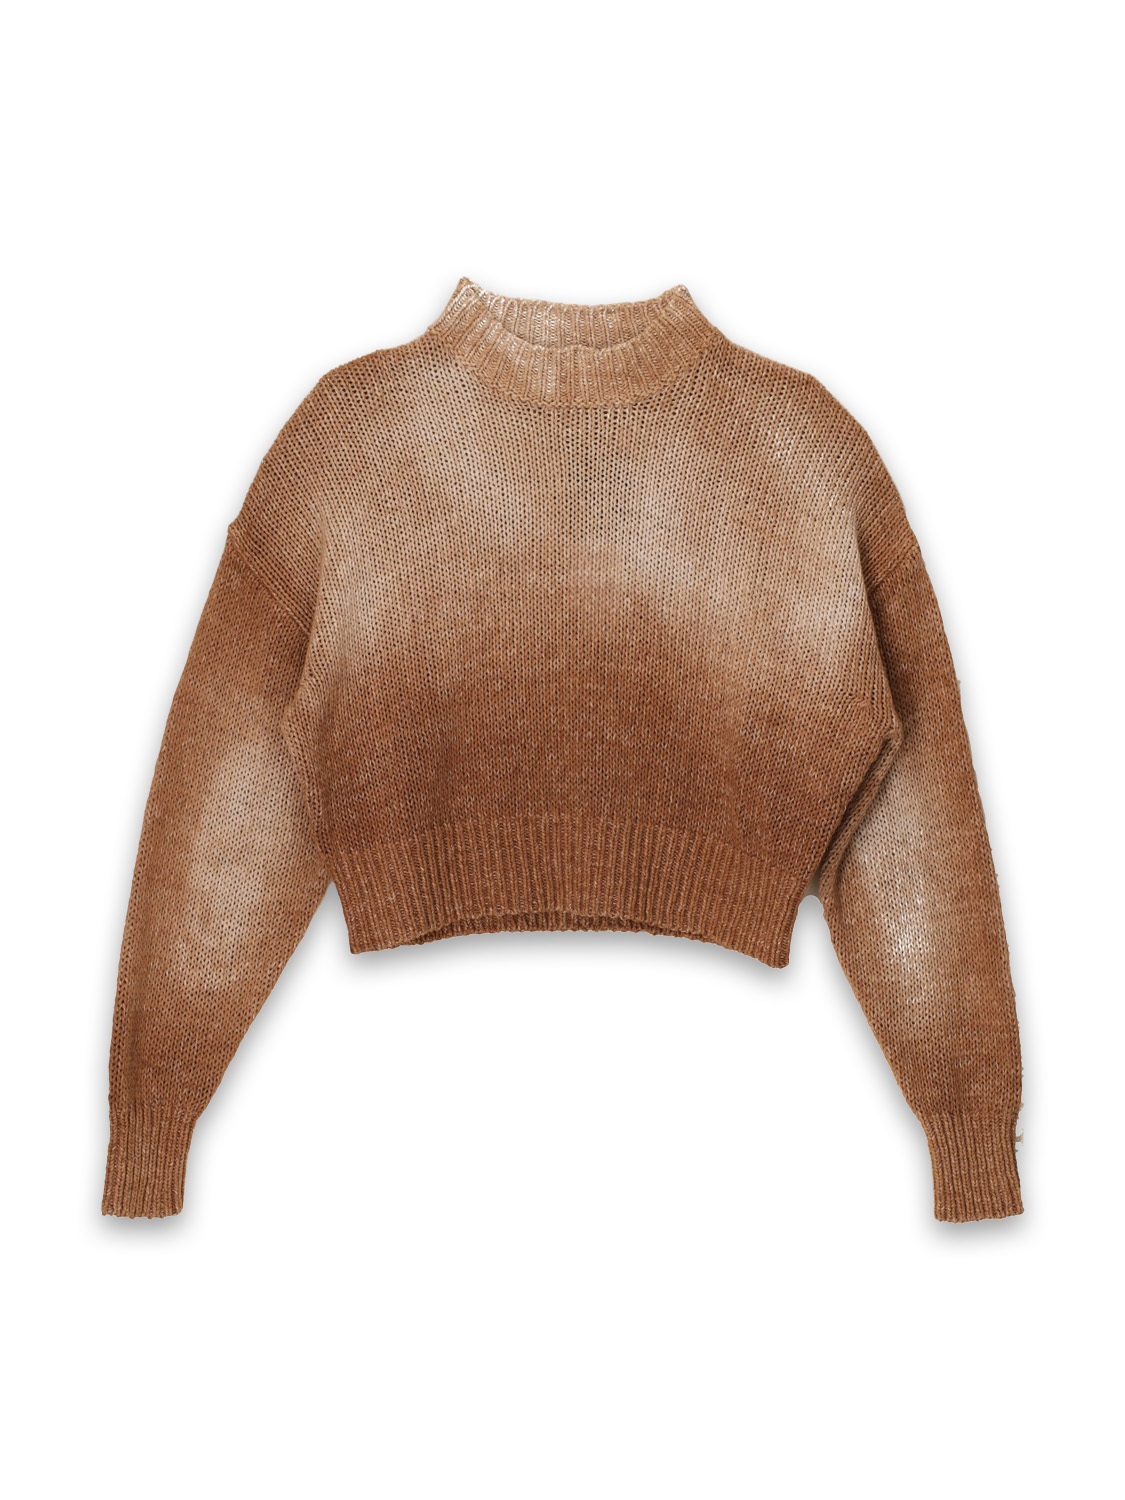 Roberto Collina Manica - Short knitted sweater with color gradients  camel XS